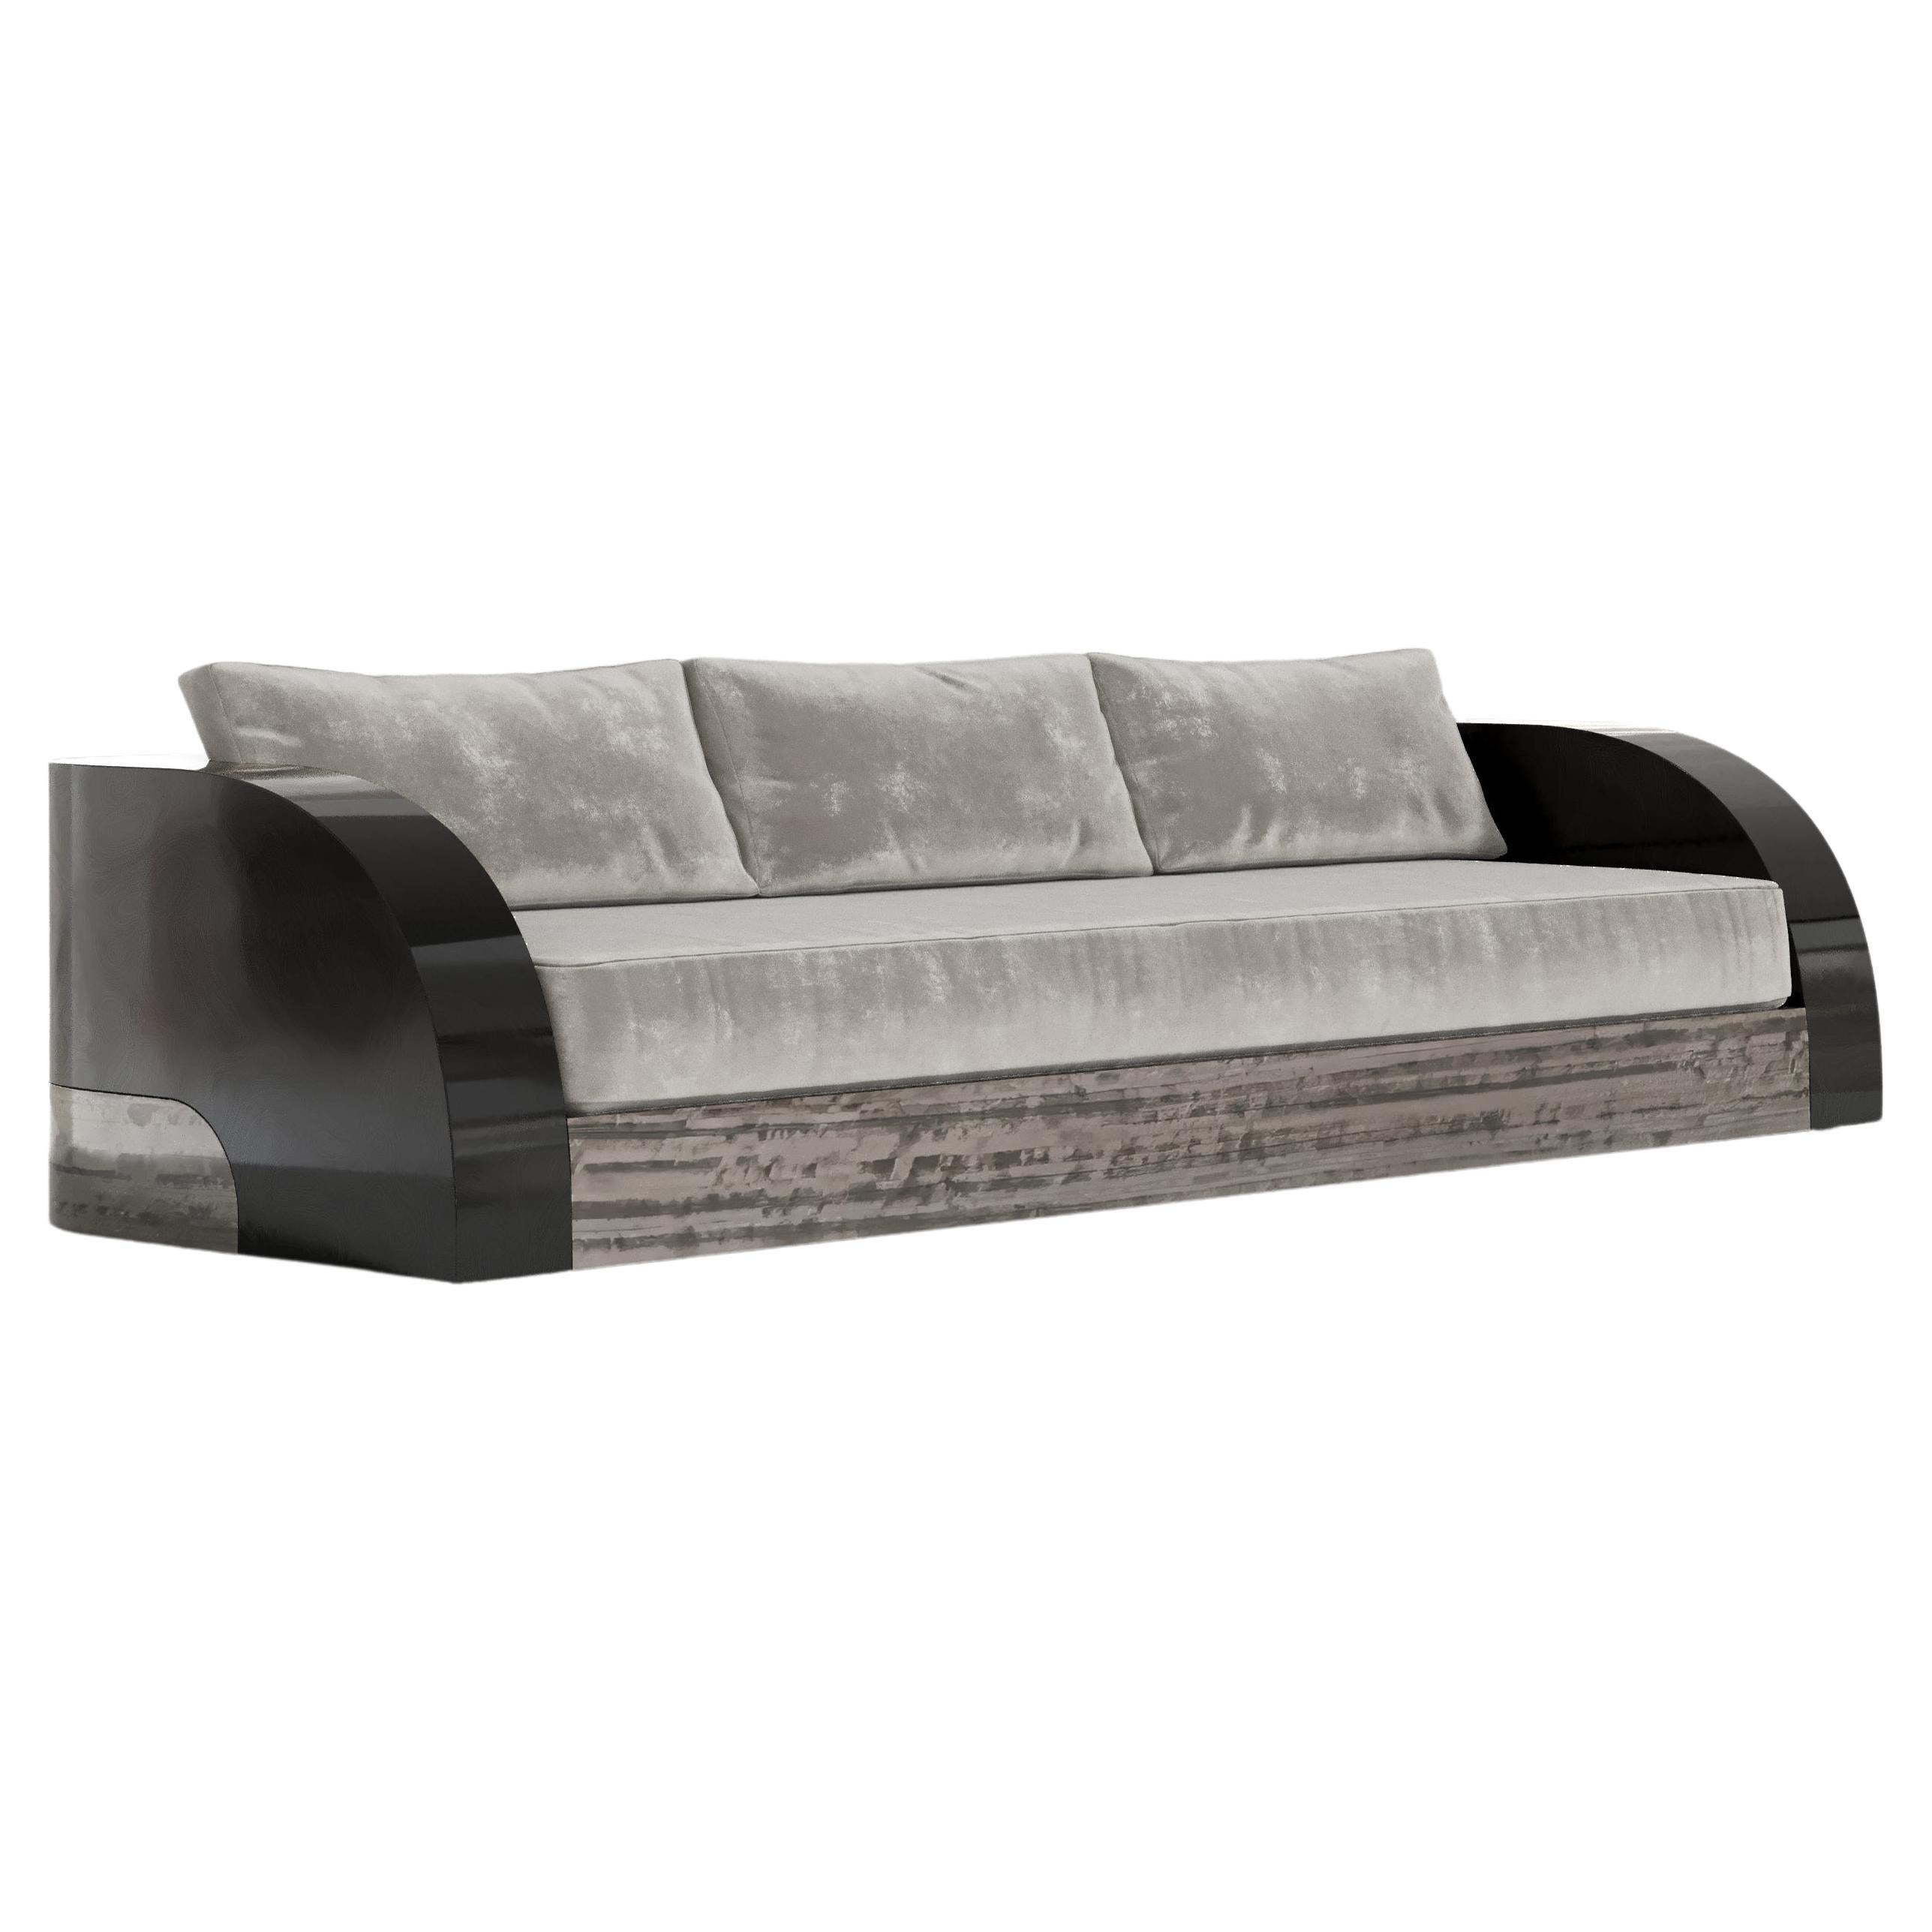 Magno Sofa in Eucalyptus and Black Lacquer by Palena Furniture   For Sale